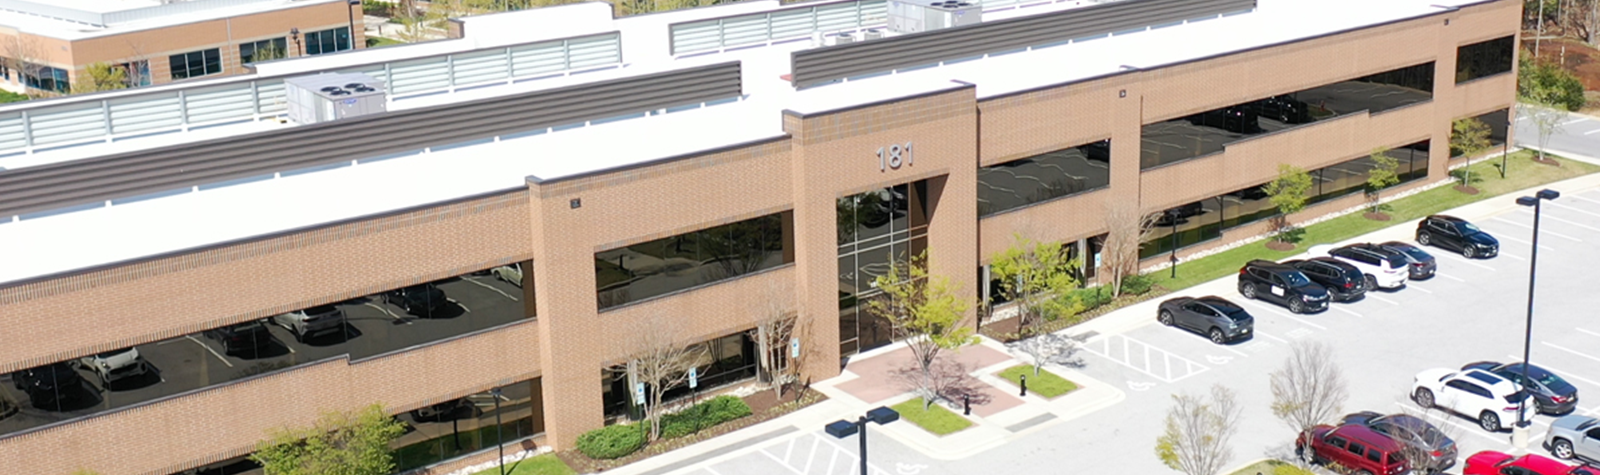 Eagle Title Expands Office Footprint